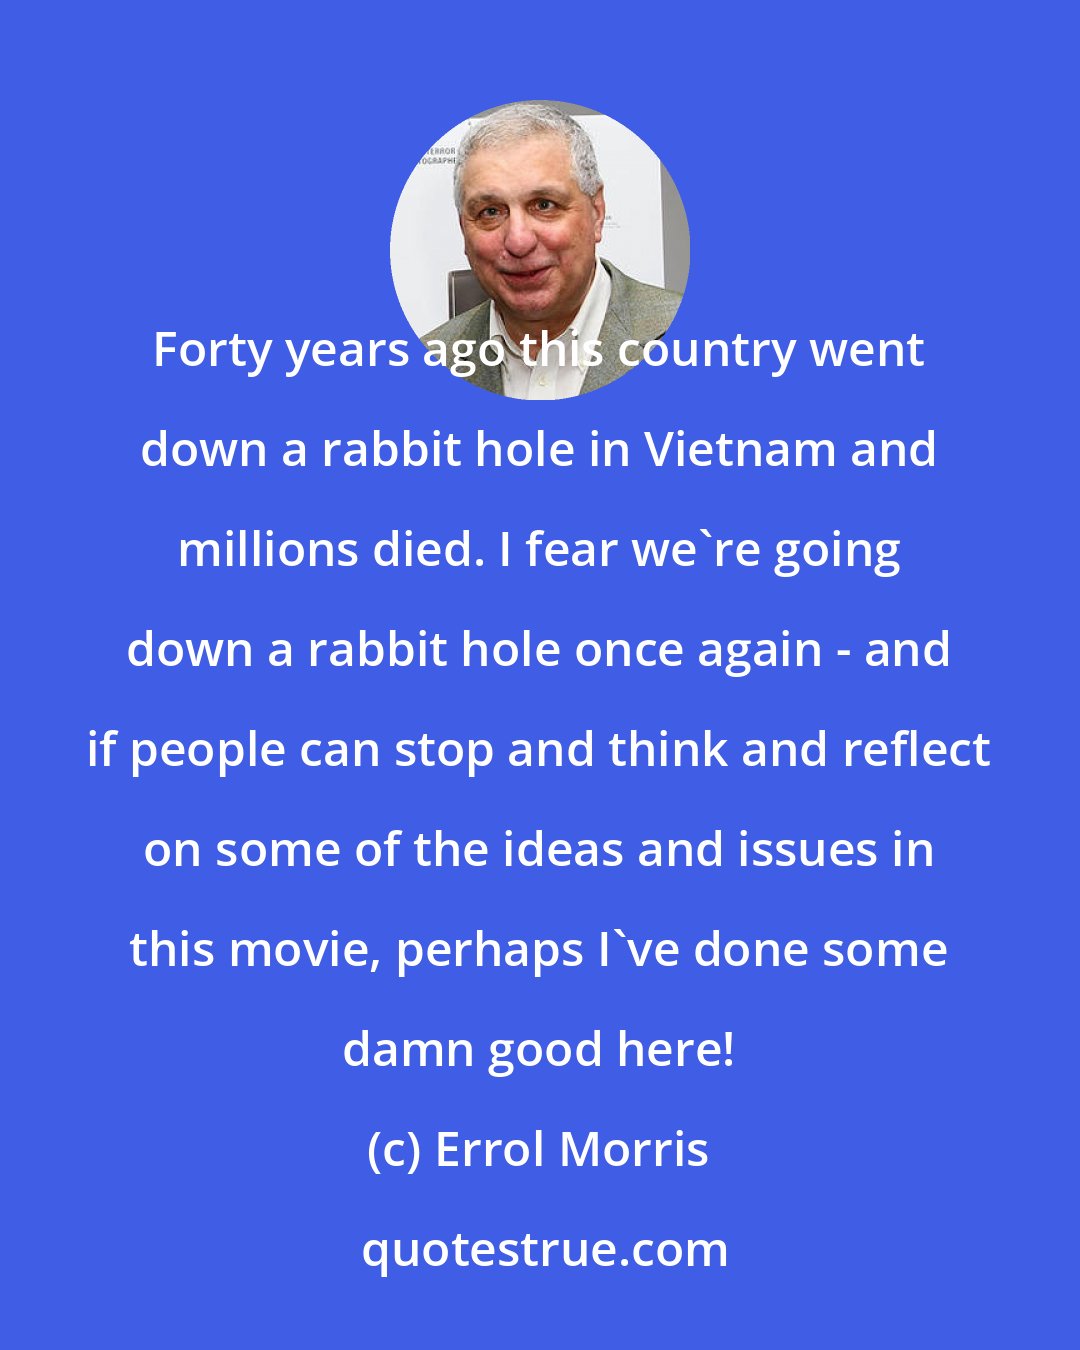 Errol Morris: Forty years ago this country went down a rabbit hole in Vietnam and millions died. I fear we're going down a rabbit hole once again - and if people can stop and think and reflect on some of the ideas and issues in this movie, perhaps I've done some damn good here!